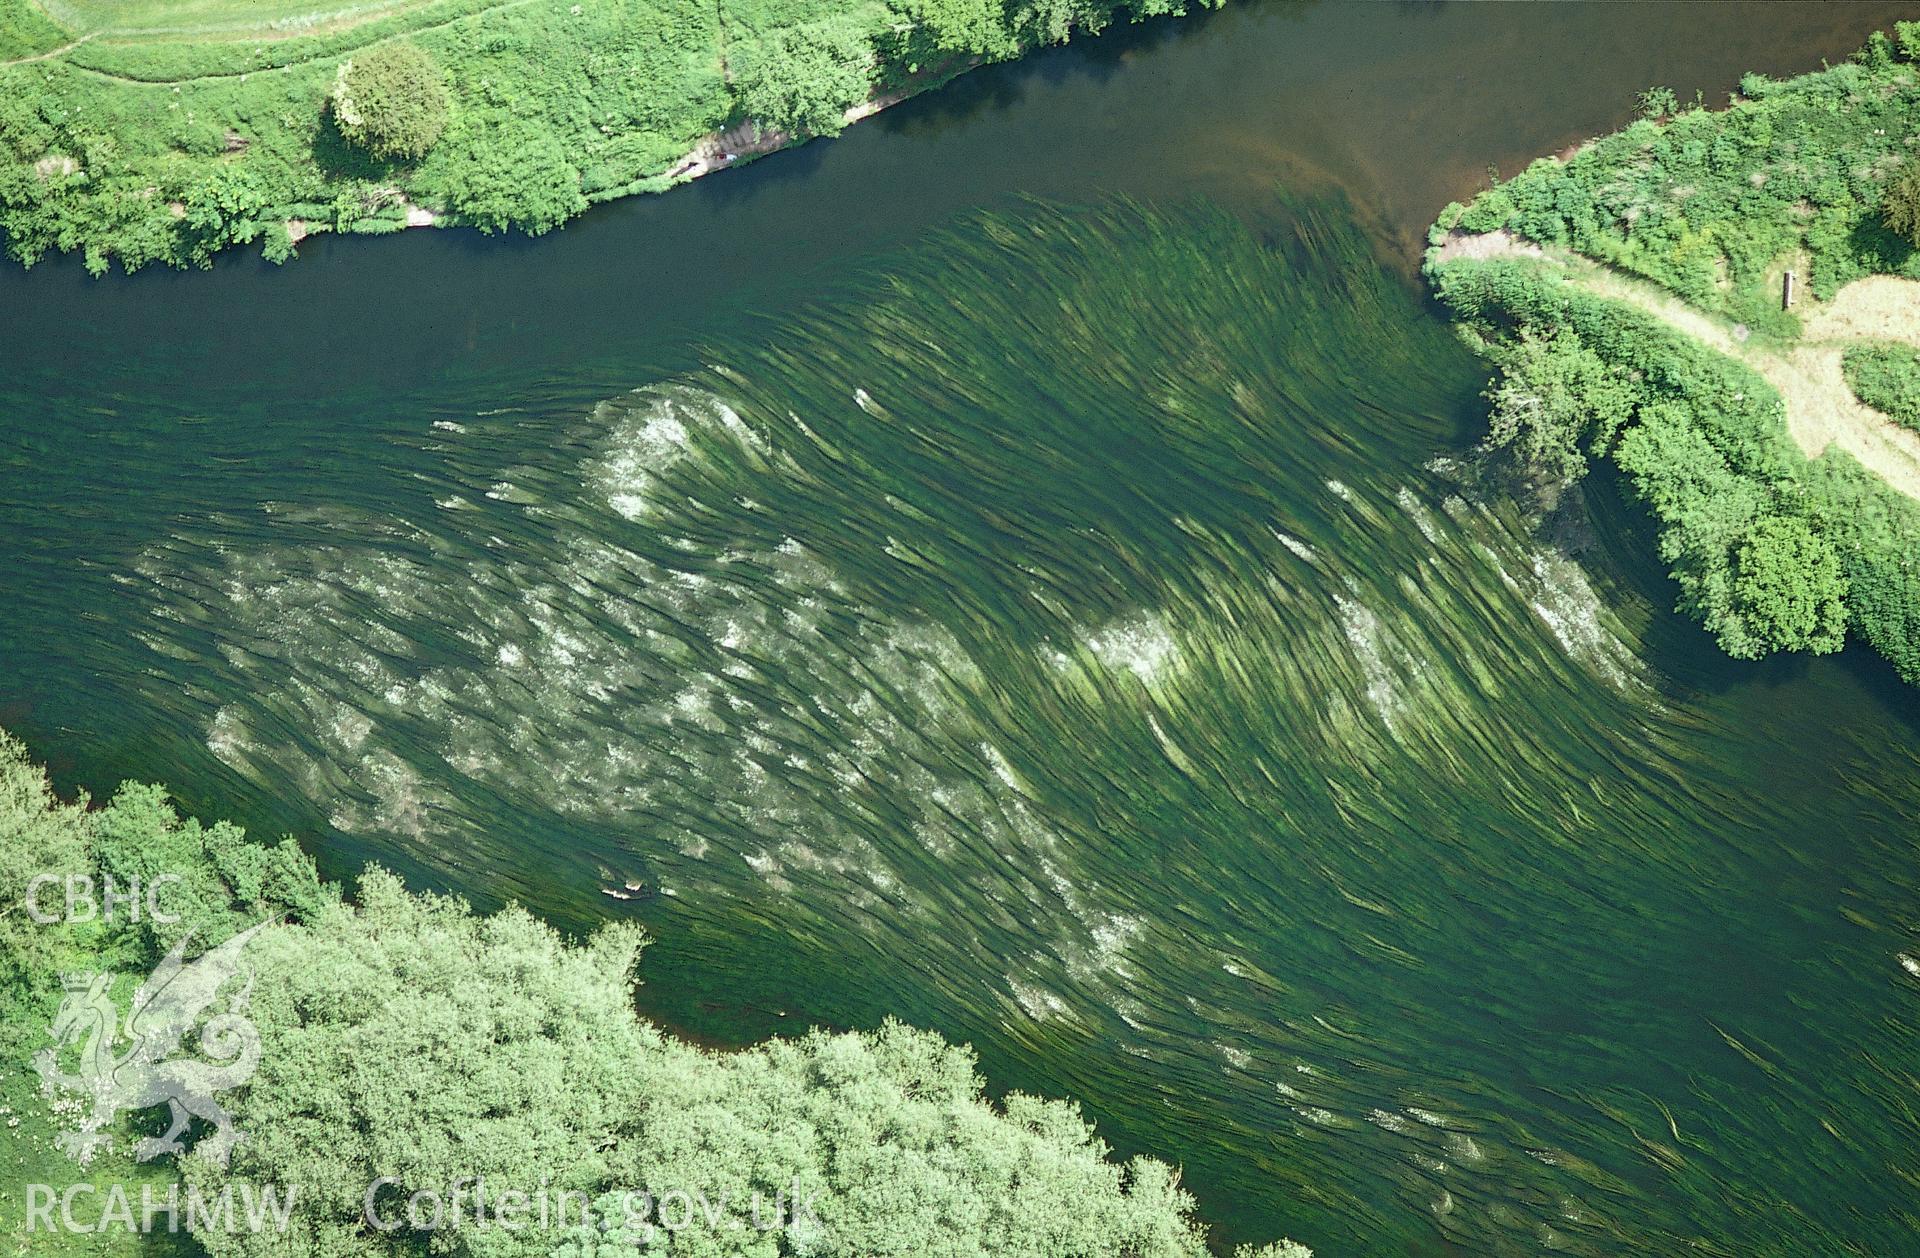 RCAHMW colour slide oblique aerial photograph of the confluence of the rivers Monmow and Wye, taken by Toby Driver, 2004